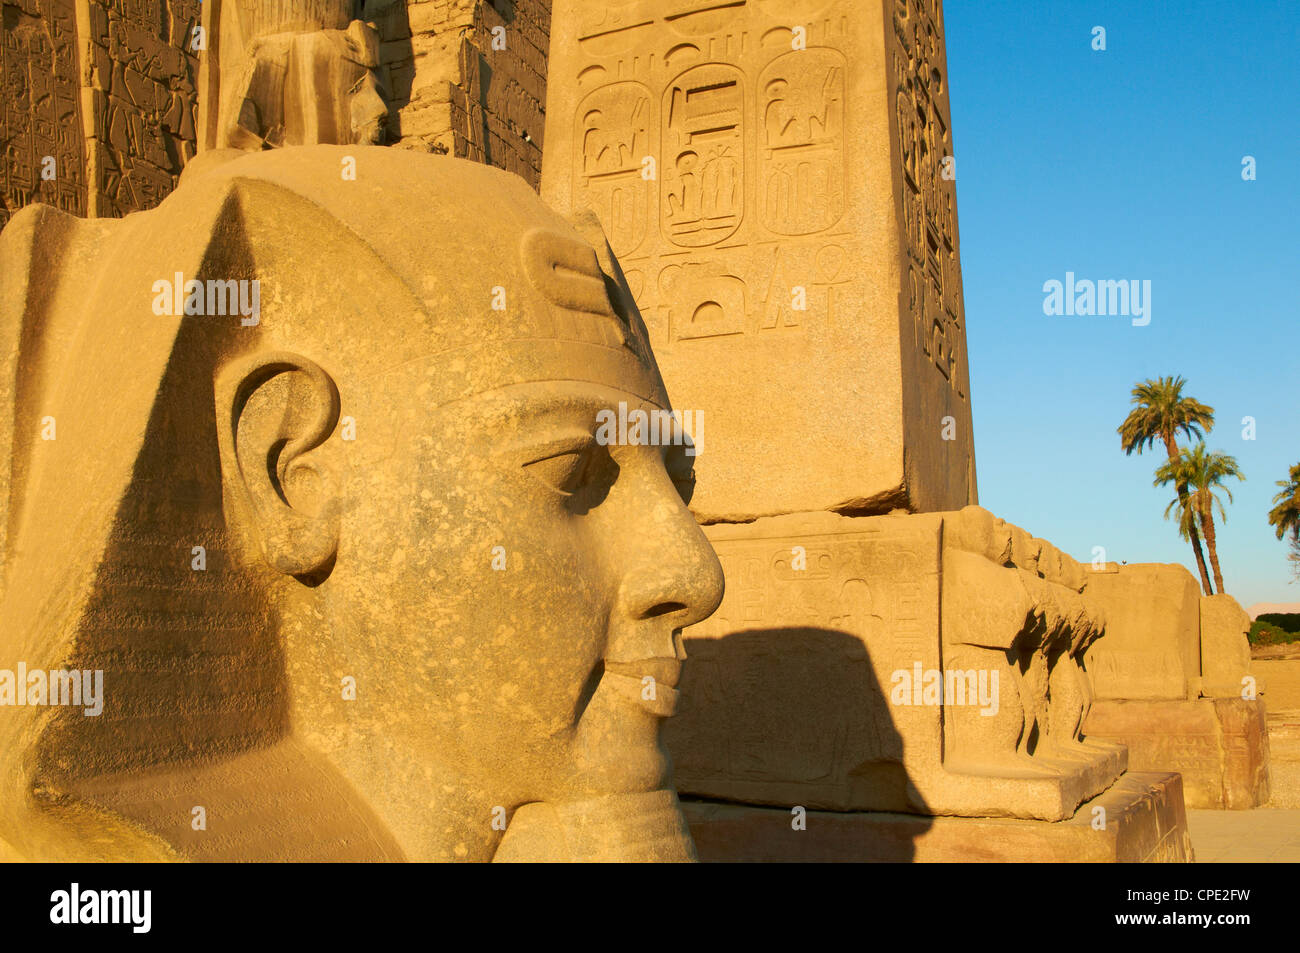 Statue of the pharaoh Ramesses II and Obelisk, Temple of Luxor, Thebes, UNESCO World Heritage Site, Egypt, North Africa, Africa Stock Photo